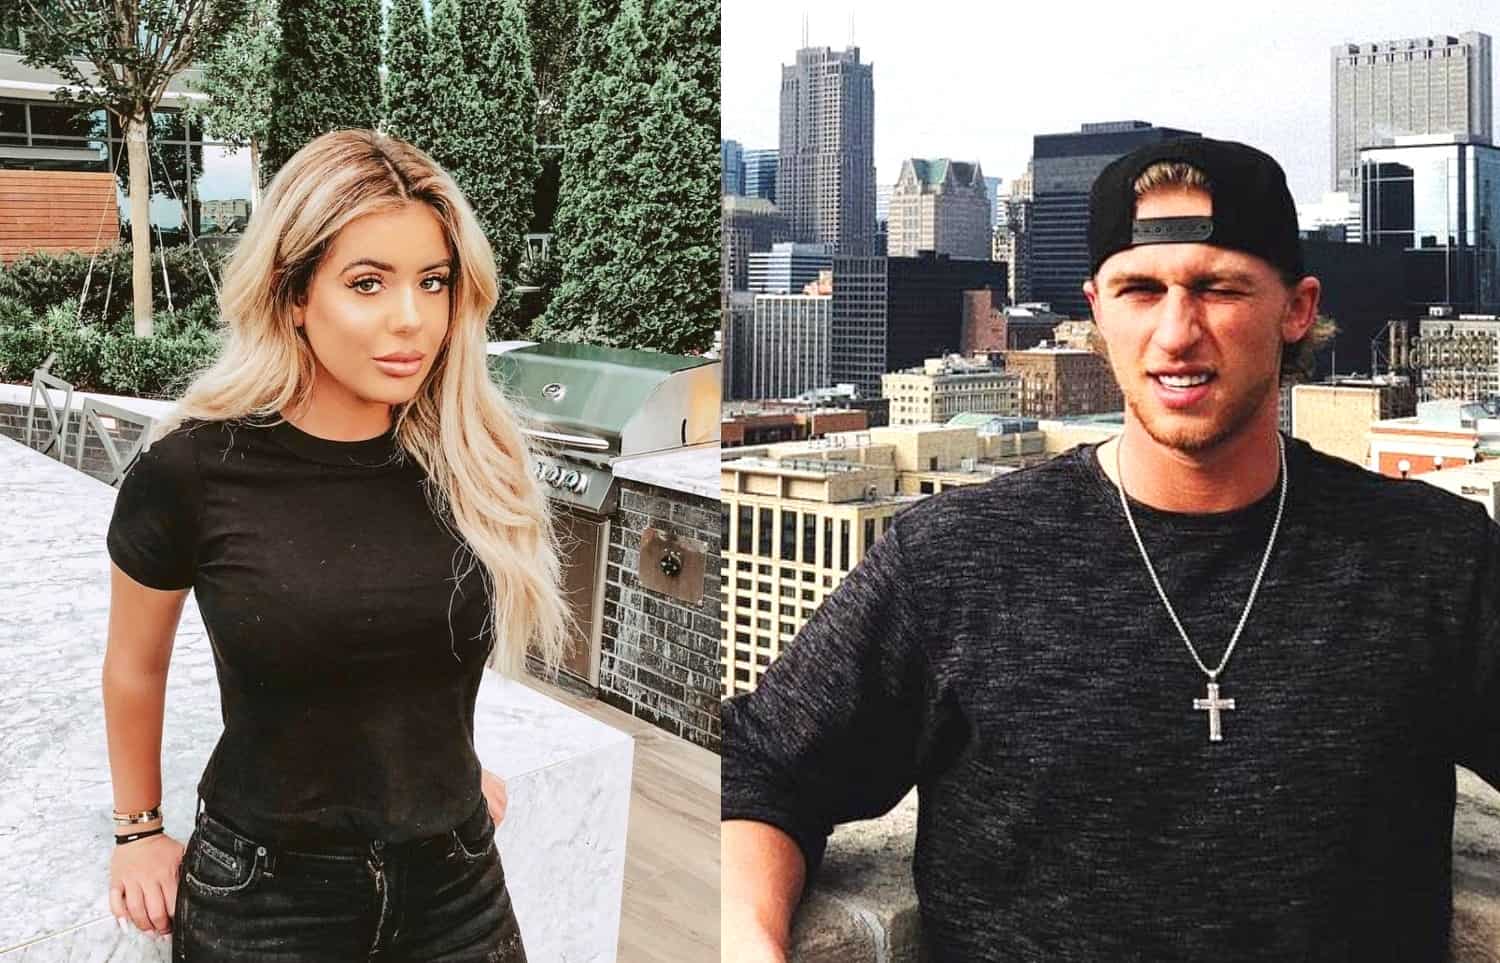 Brielle Biermann & Michael Kopech: We Might Do Spin-off Show, IF